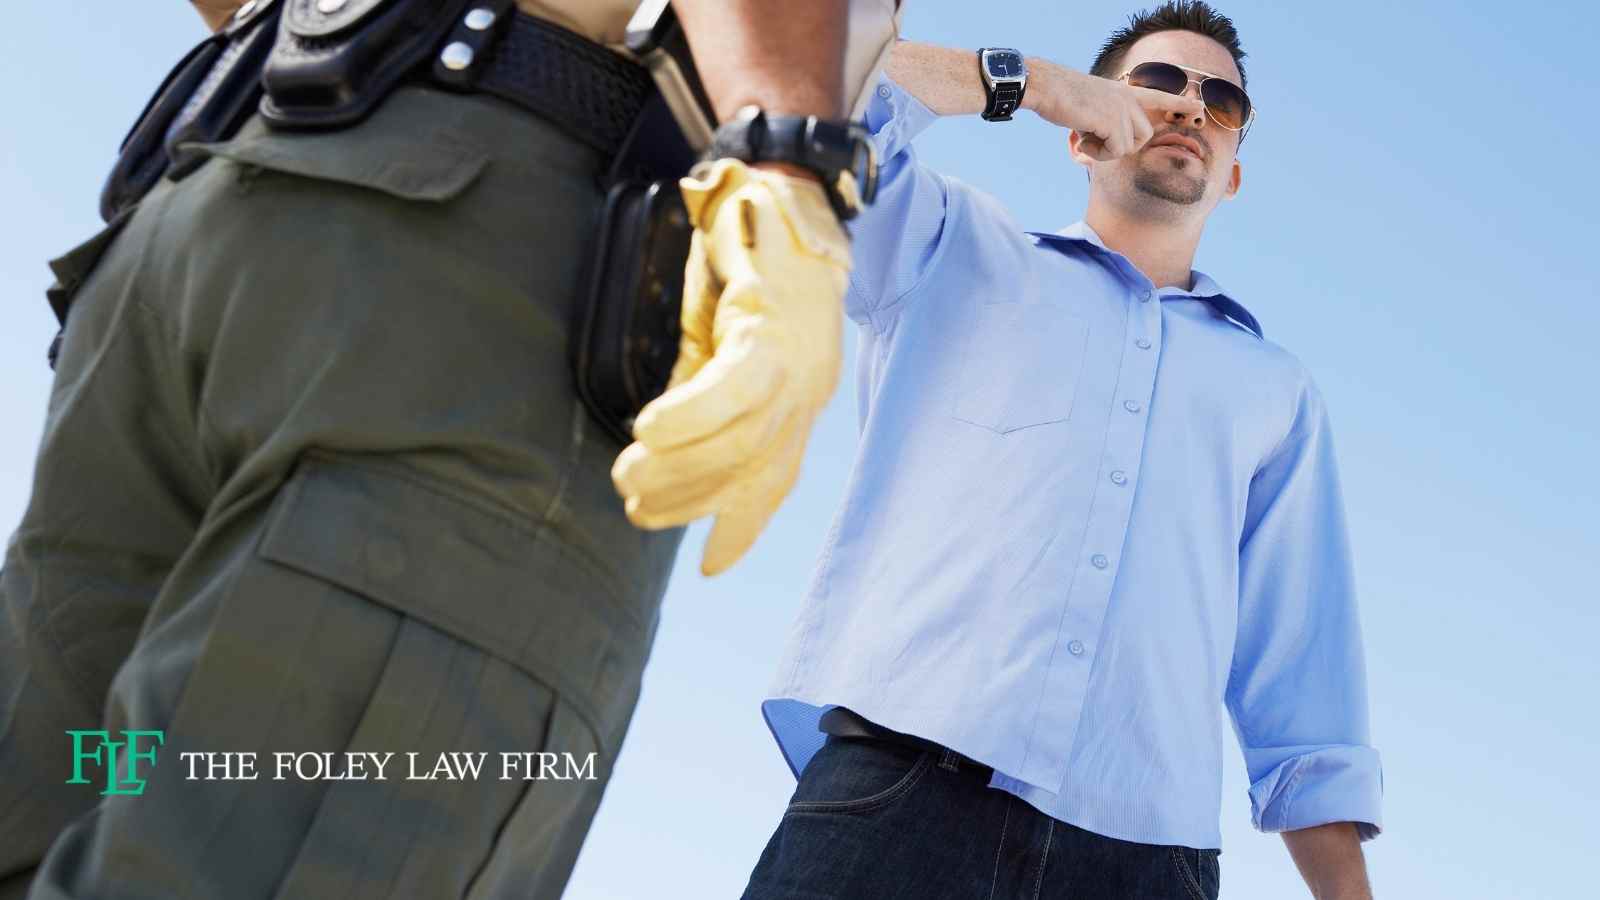 What Should You Do When Pulled Over For A DWI In Colorado?